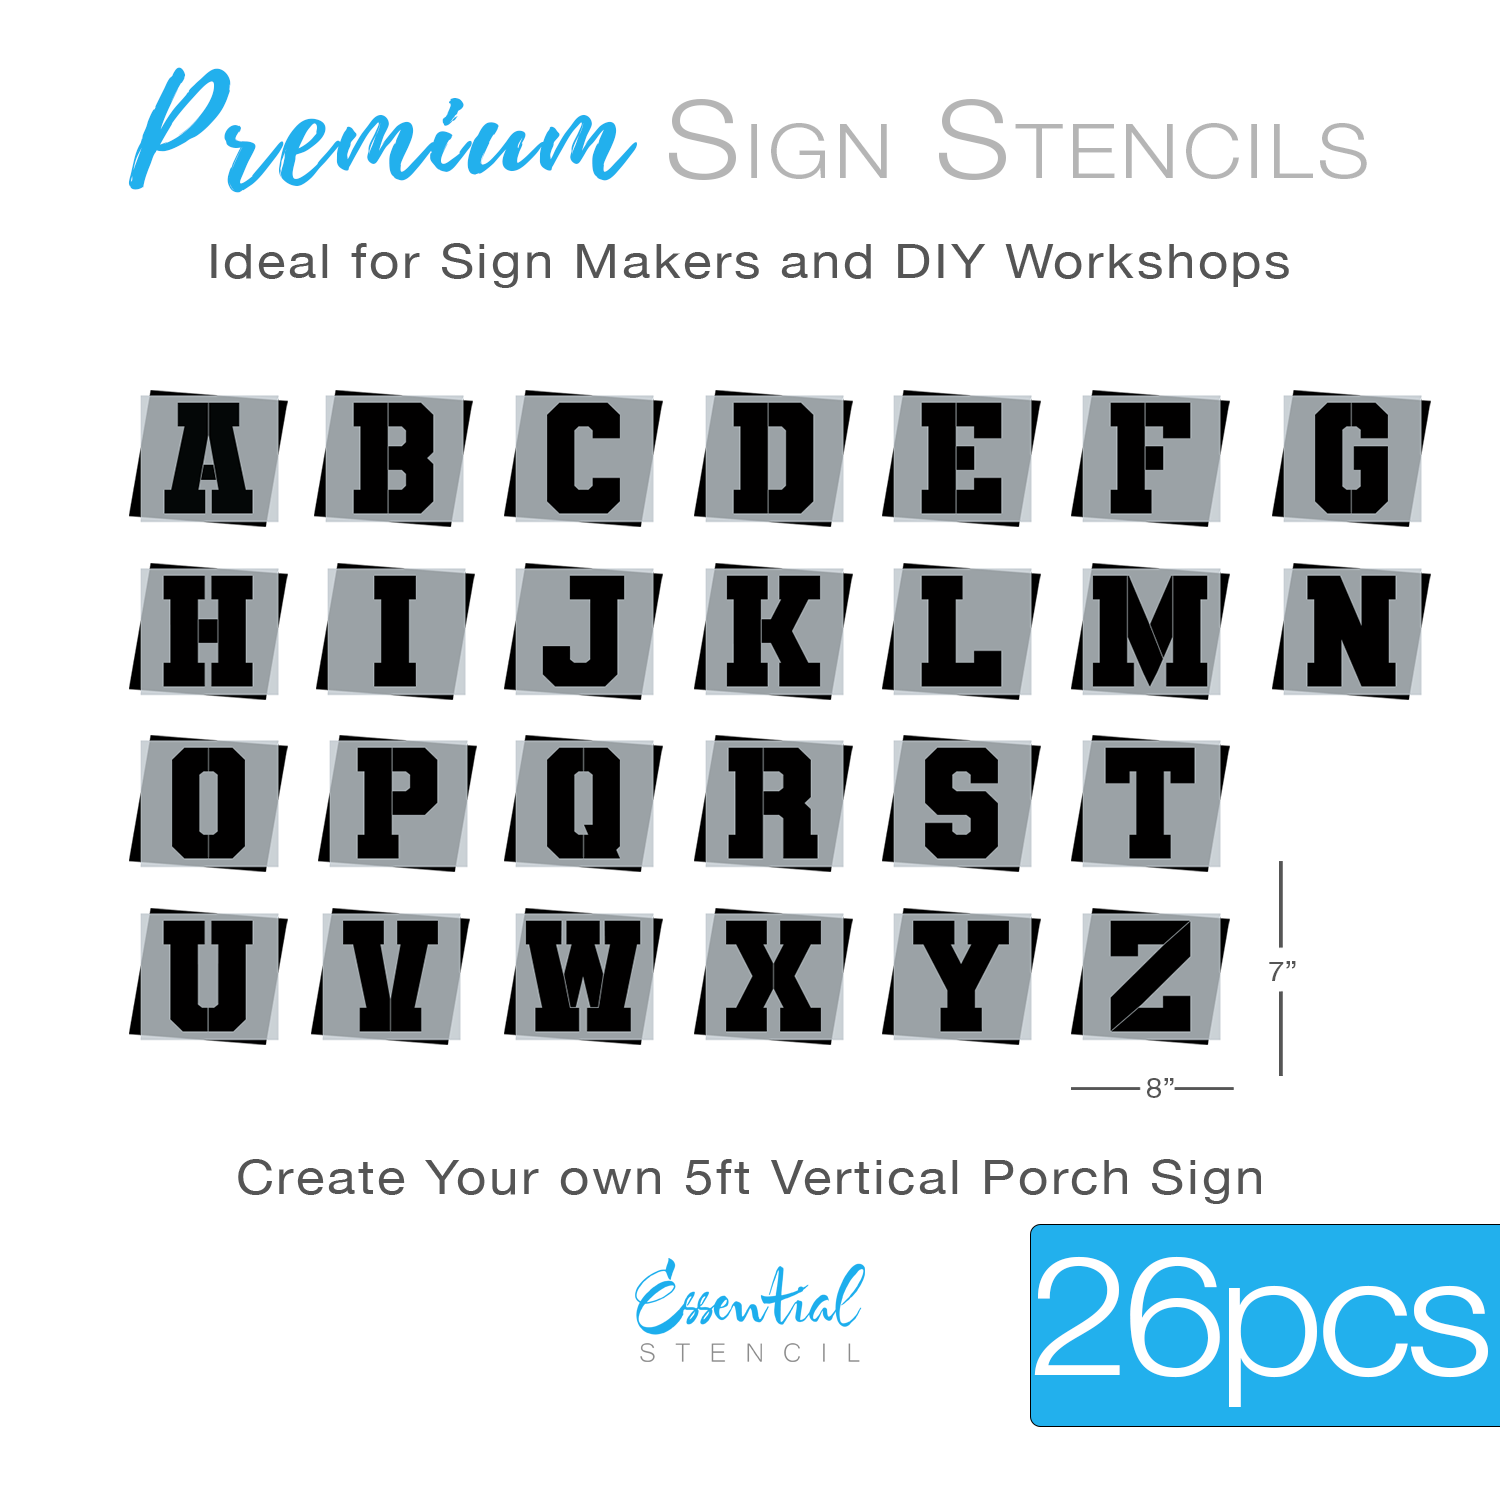 Make Custom Stencils  Reusable Stencils for Logos, Designs, Text, or  Letters